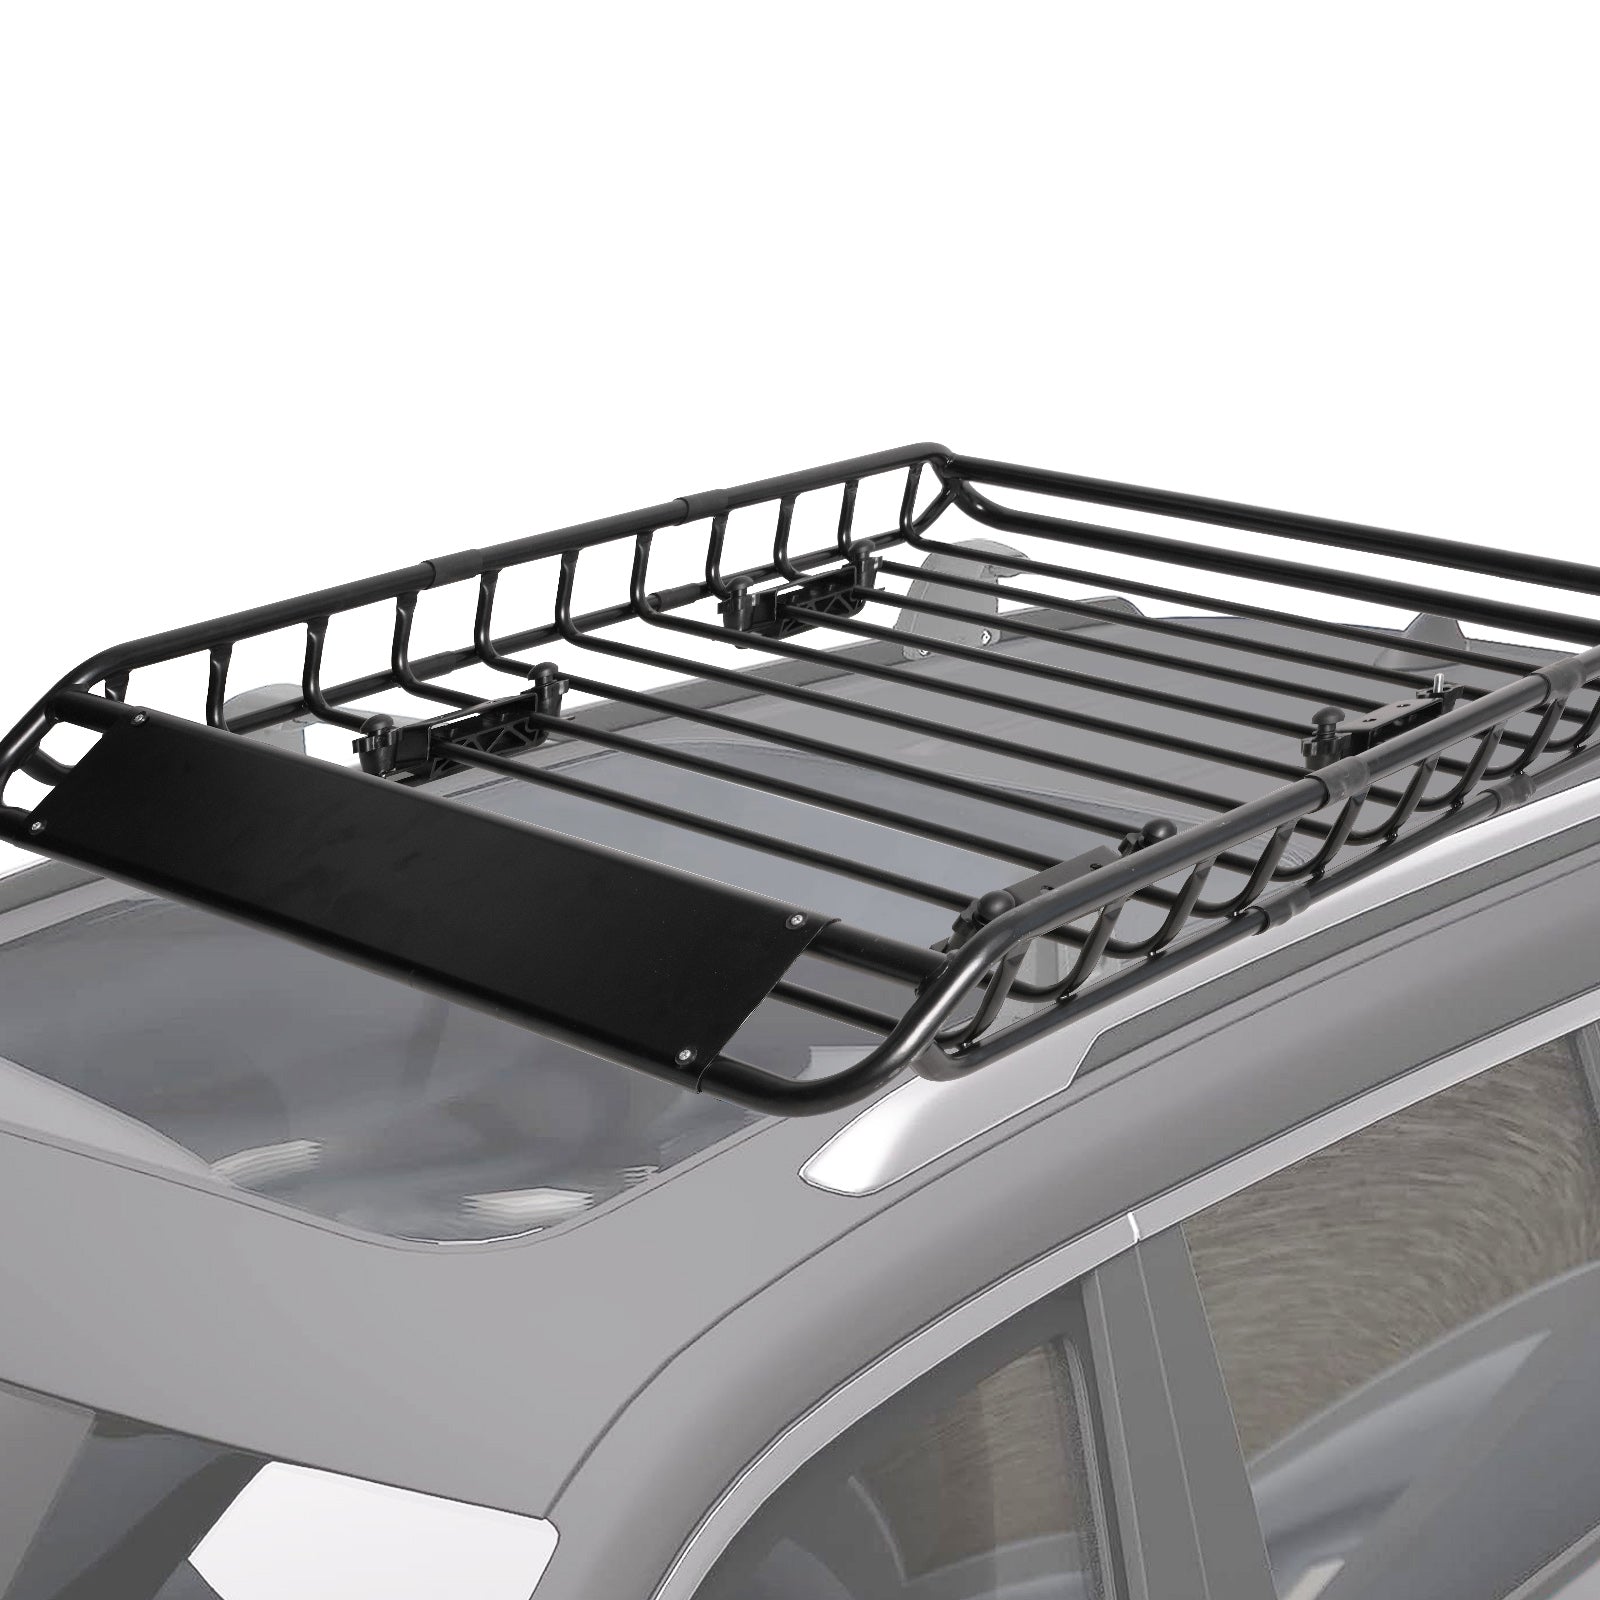 Universal Roof Rack Basket: 45 x 36 Inches Heavy-Duty Rooftop Cargo Rack, 150 lbs Cargo Carrier for SUV, Truck & Car - Black Luggage Holder